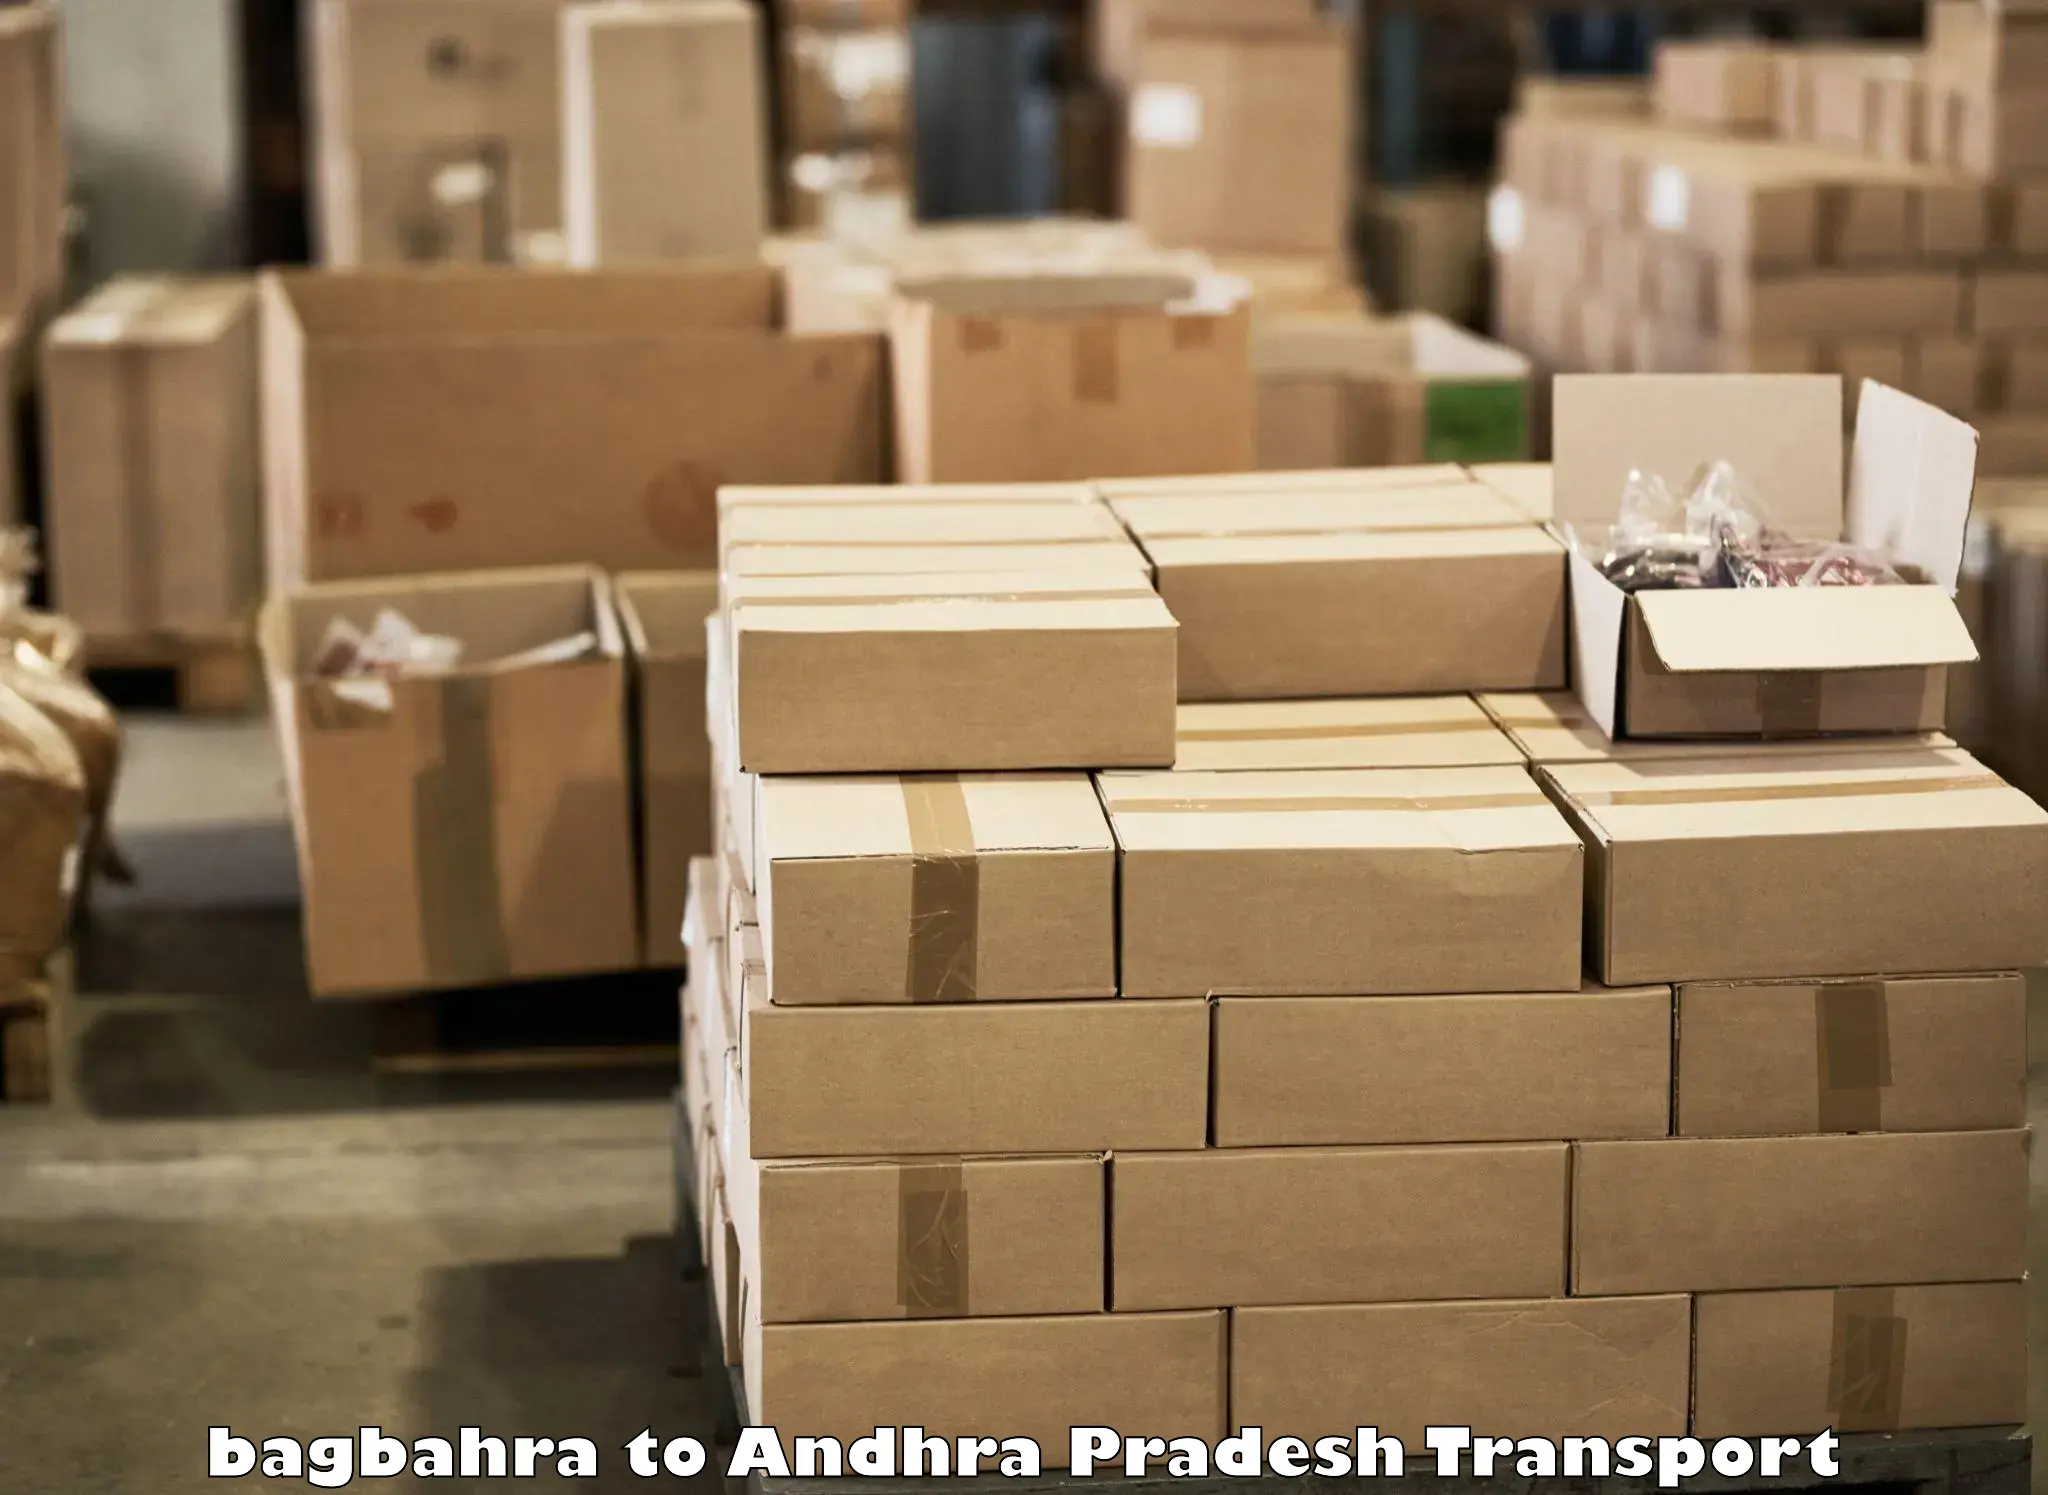 Daily parcel service transport in bagbahra to Akividu